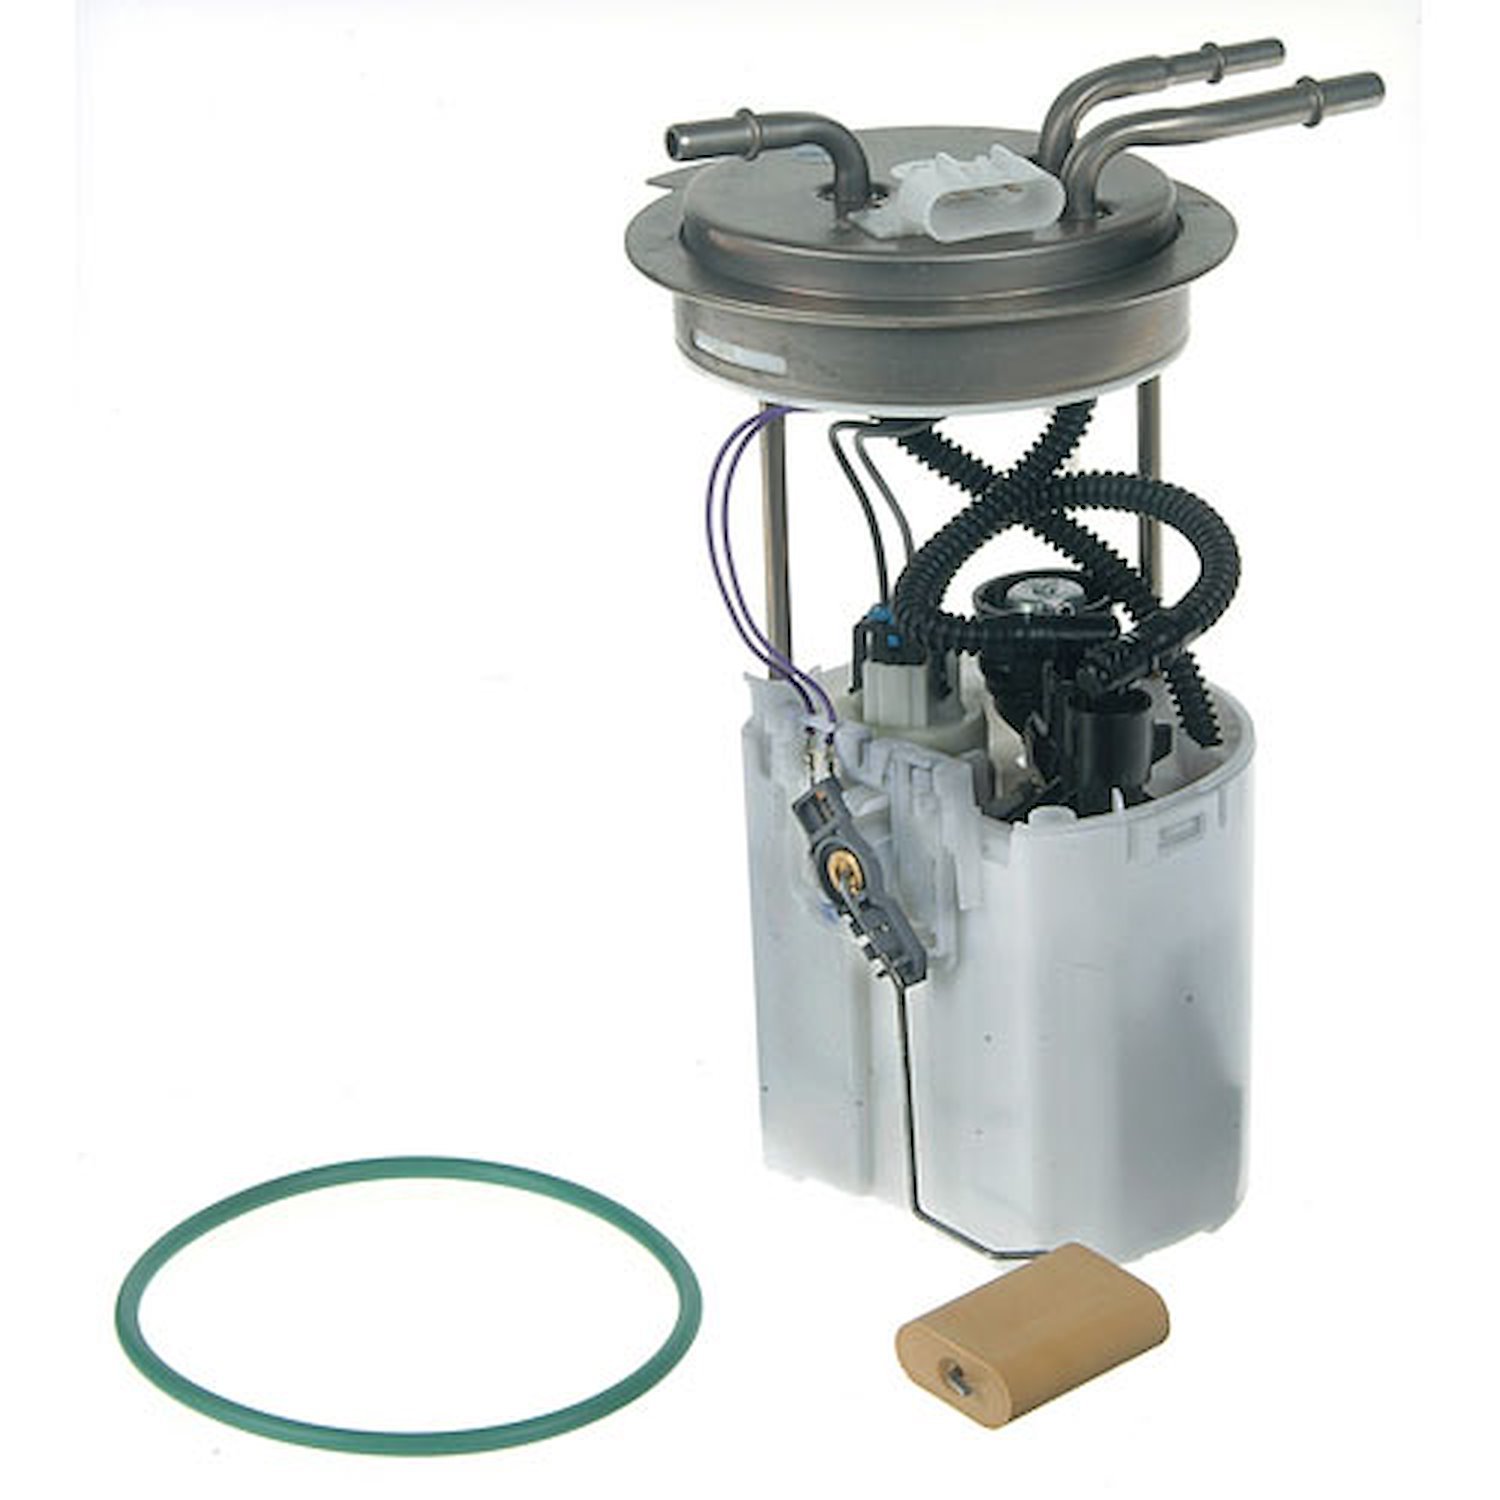 OE GM Replacement Electric Fuel Pump Module Assembly 2004-07 Chevrolet Avalanche 2500/Suburban 2500 6.0L/8.1L V8